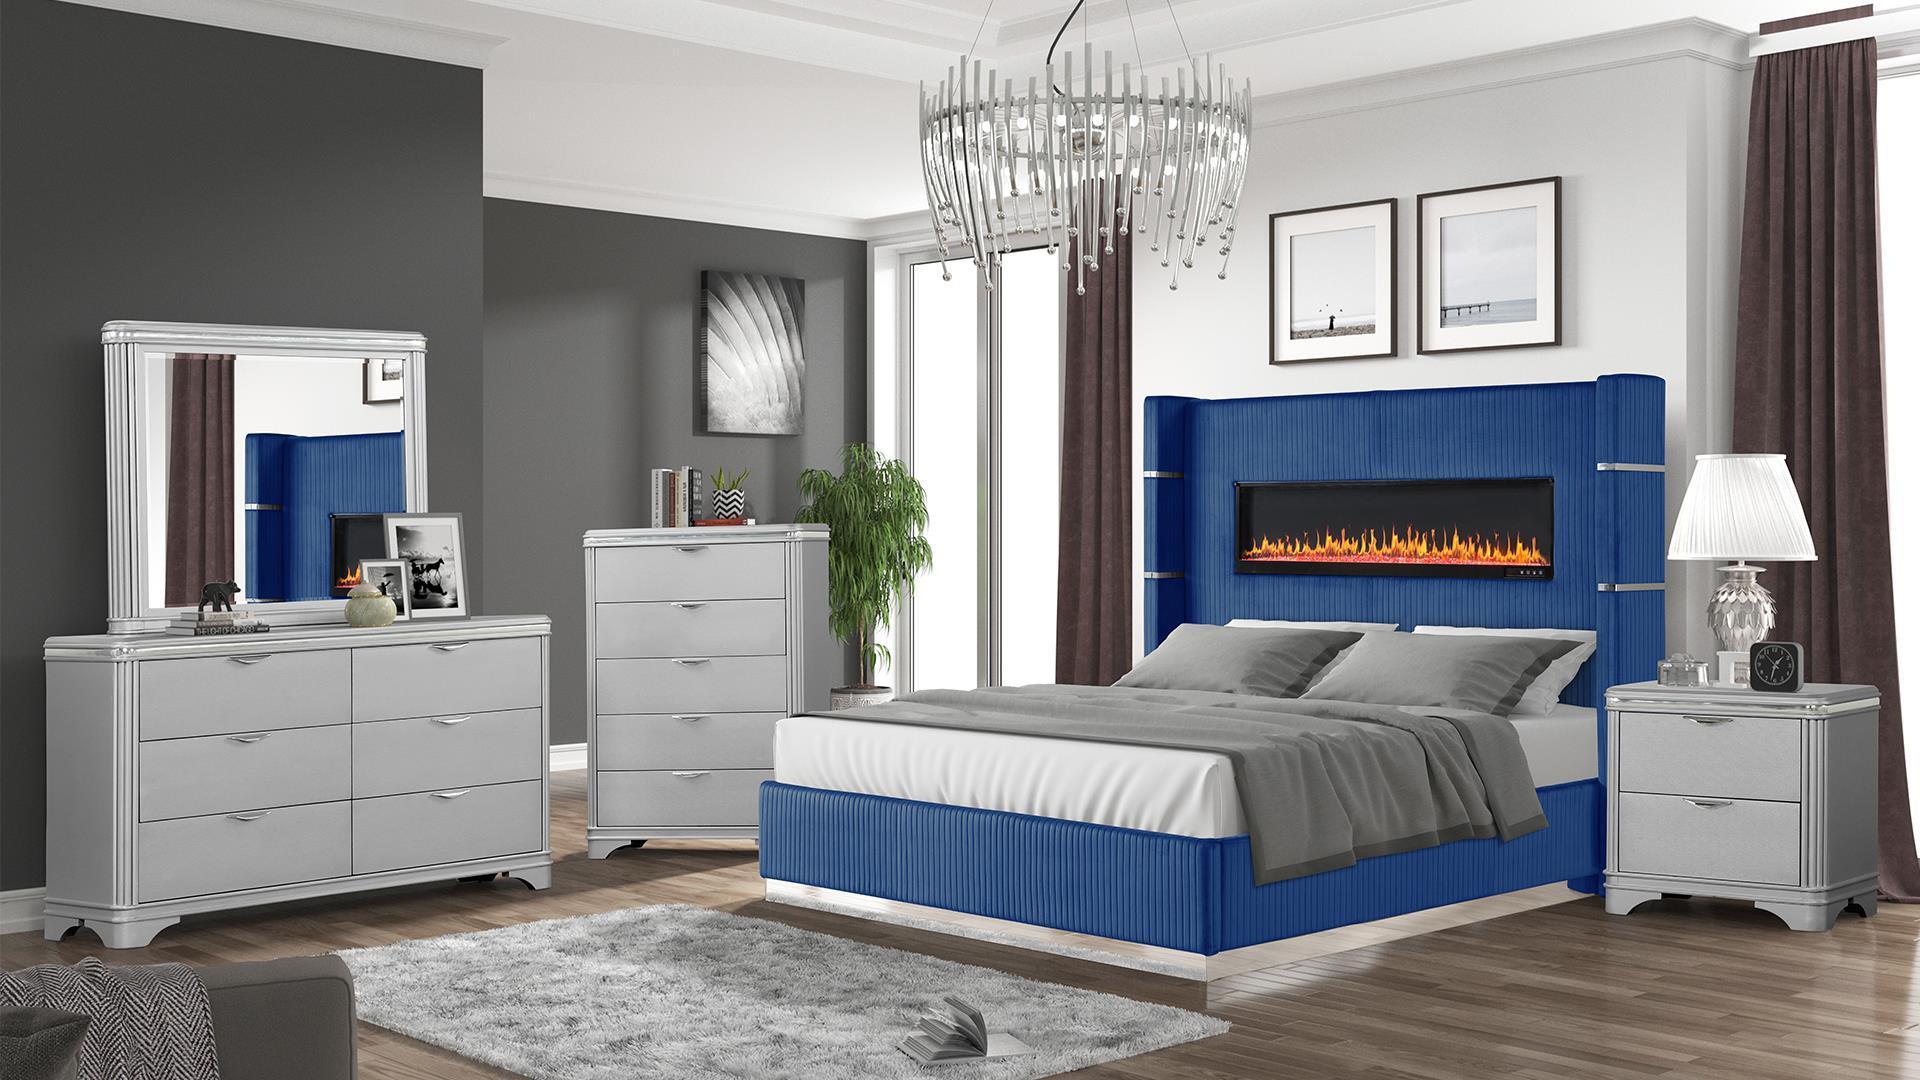 

    
Navy Queen Bedroom Set 4Pcs LIZELLE Galaxy Home Contemporary Luxury
